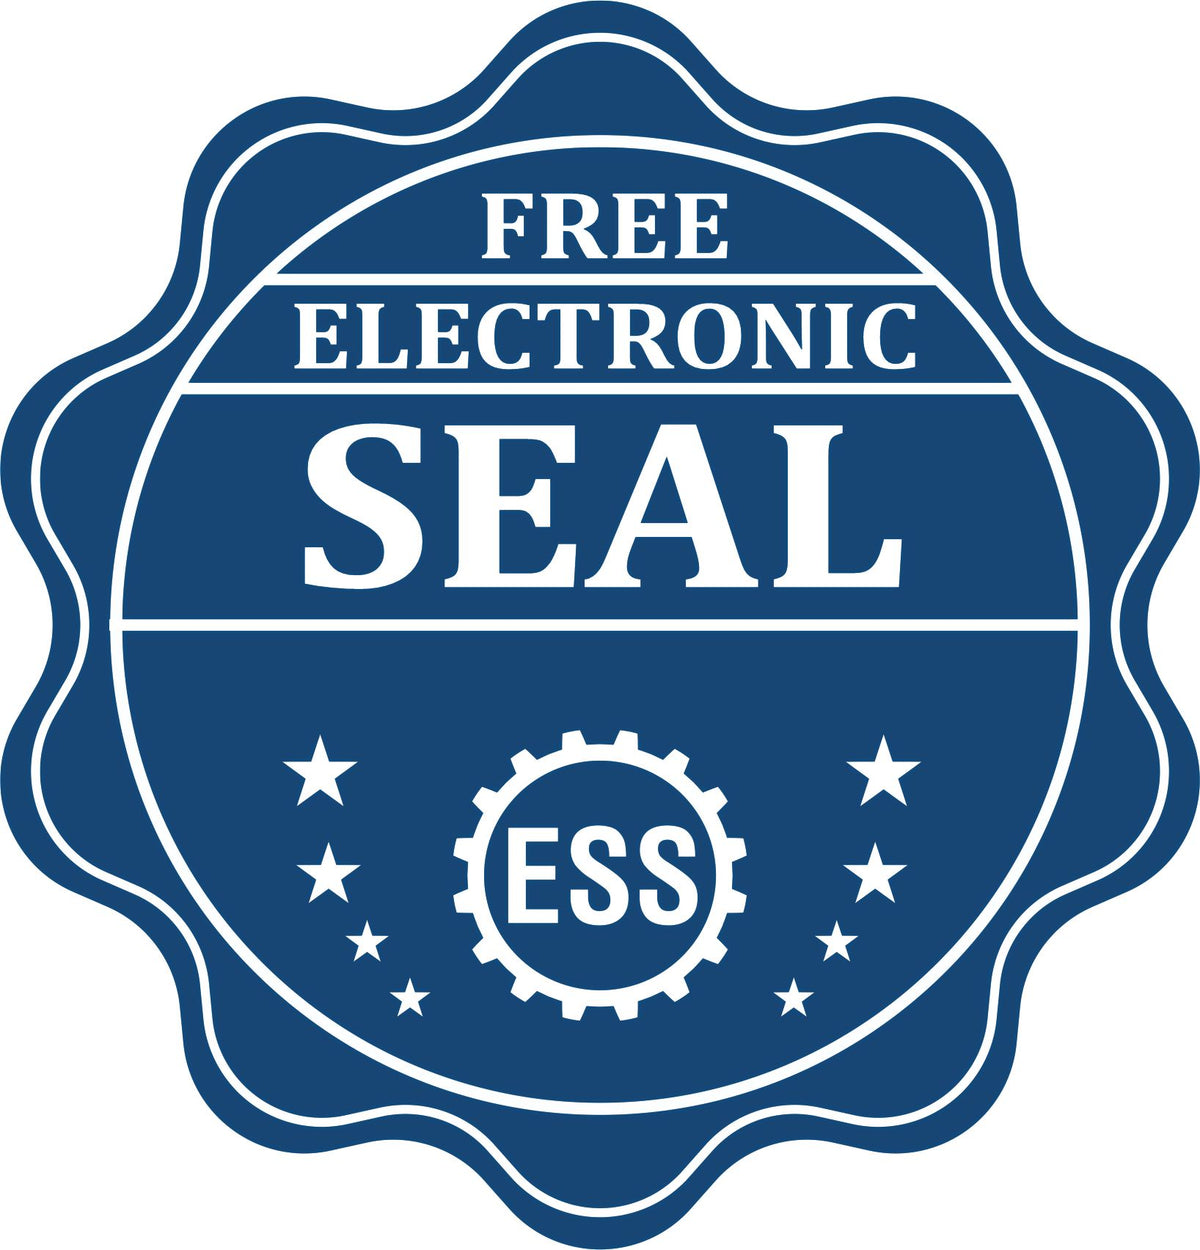 A badge showing a free electronic seal for the Hybrid Kentucky Architect Seal with stars and the ESS gear on the emblem.